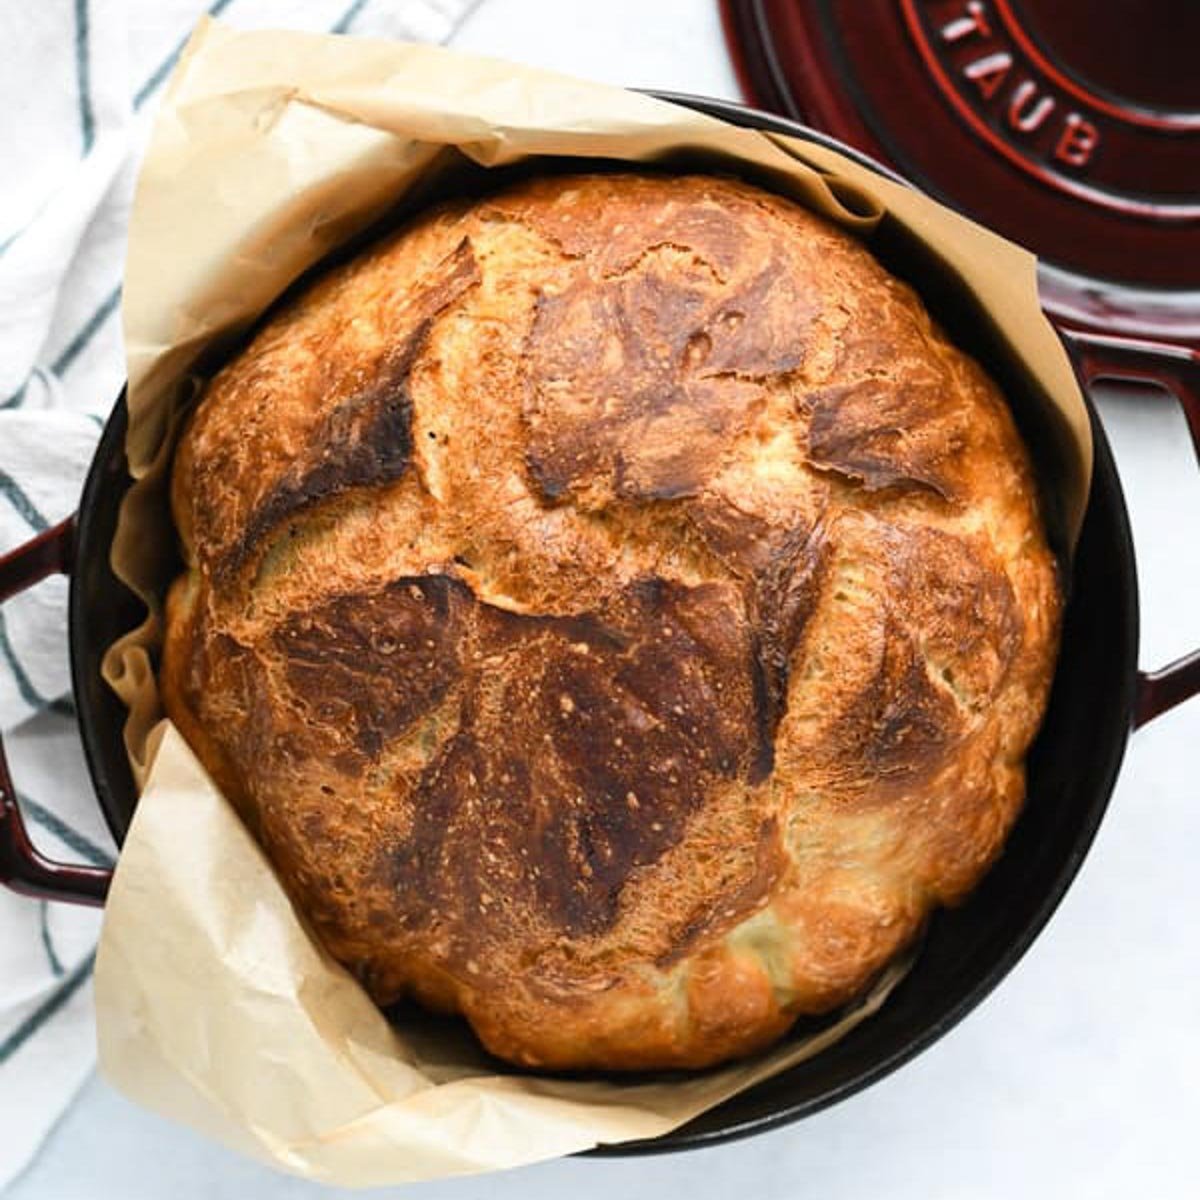 8 Dutch Oven Bread Recipes That Are Better Than the Bakery